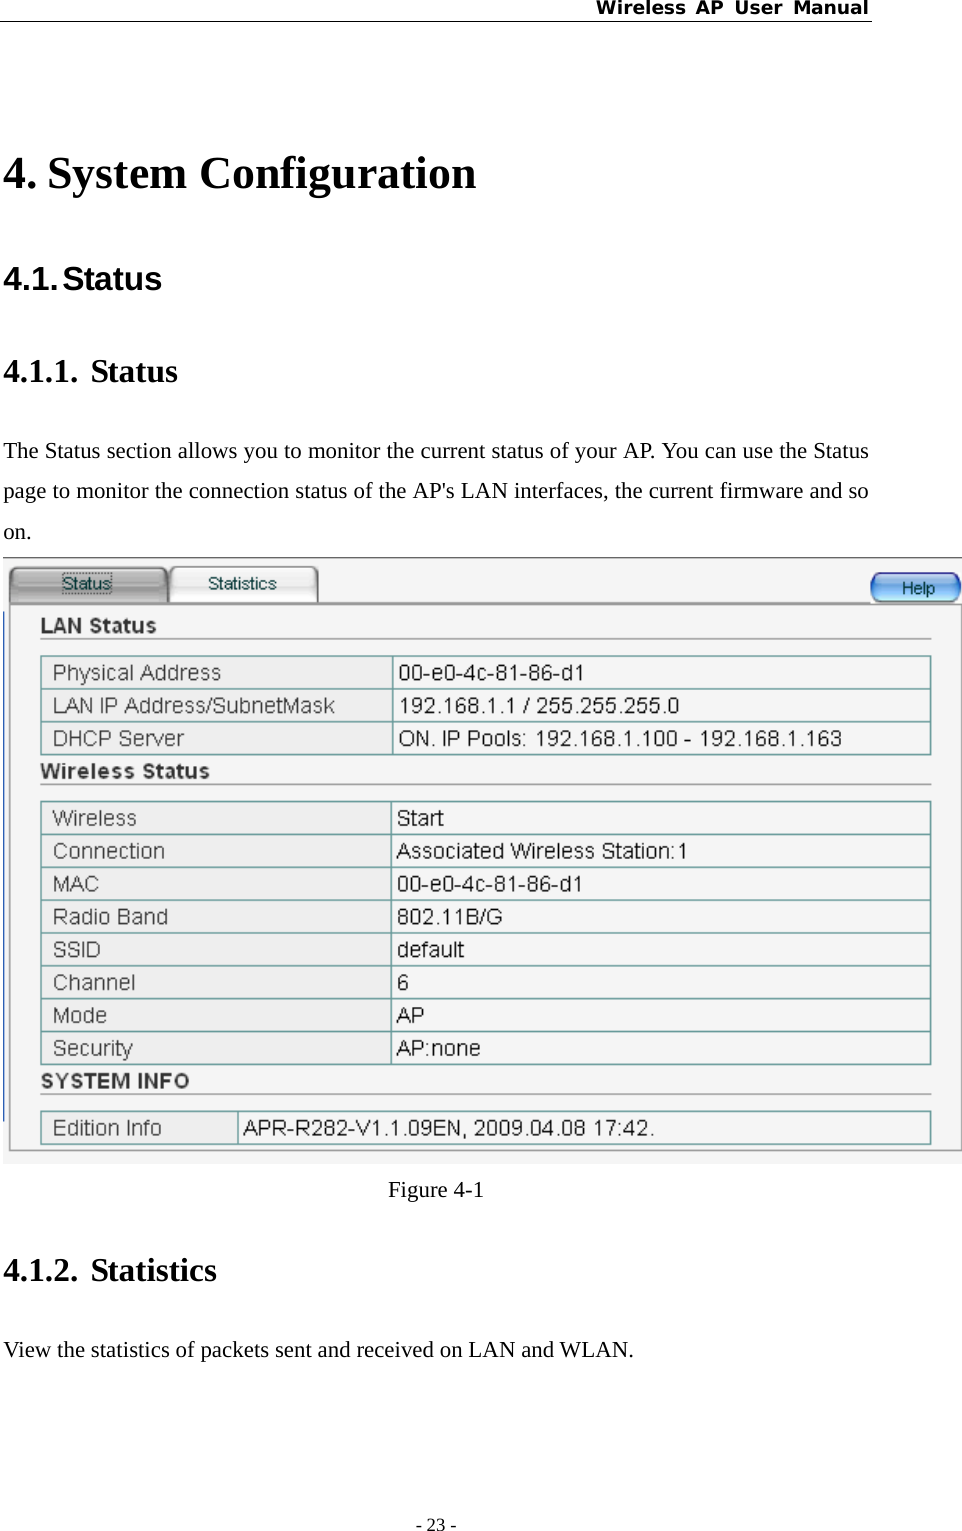 Wireless AP User Manual - 23 -   4. System Configuration 4.1. Status   4.1.1. Status The Status section allows you to monitor the current status of your AP. You can use the Status page to monitor the connection status of the AP&apos;s LAN interfaces, the current firmware and so on.  Figure 4-1 4.1.2. Statistics View the statistics of packets sent and received on LAN and WLAN. 